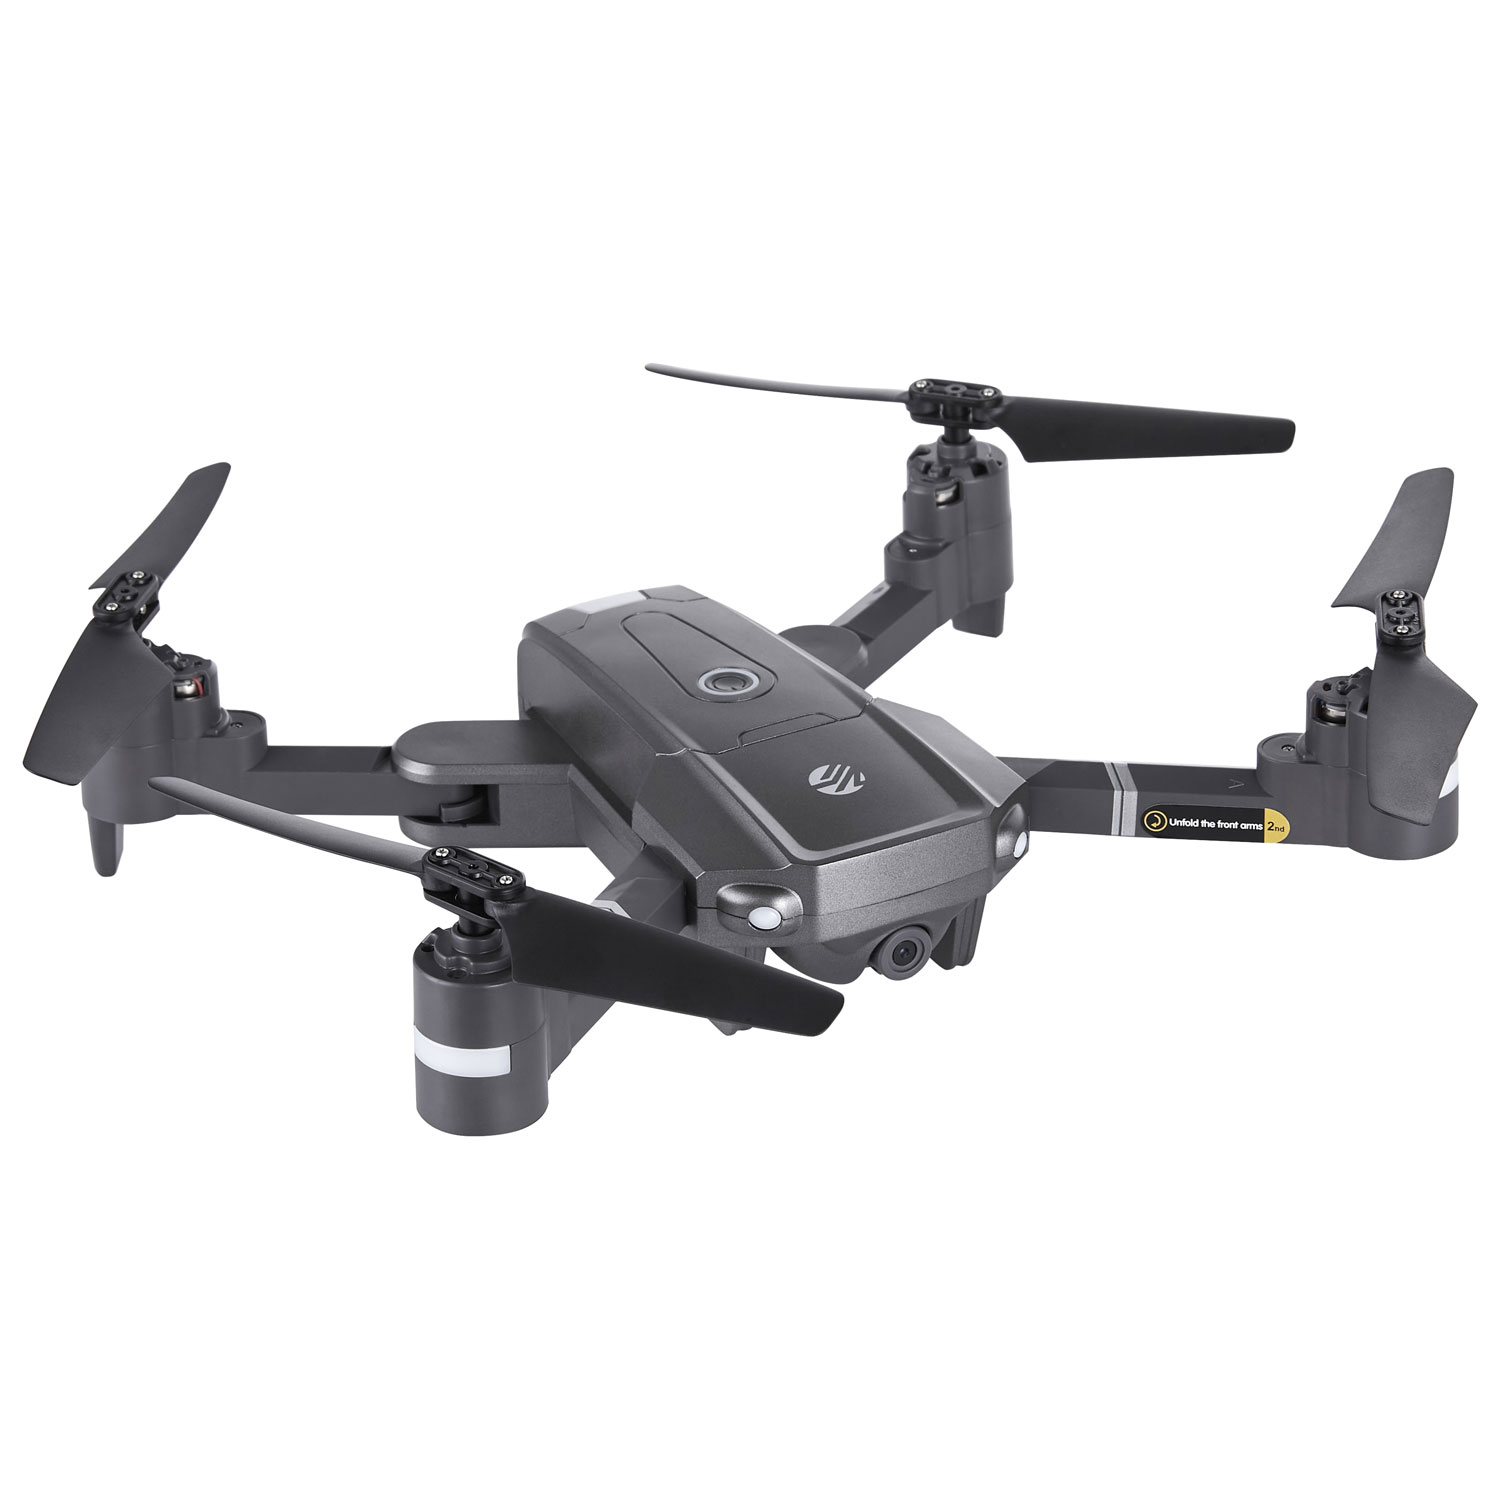 Vivitar Skyhawk Video RC Plane / Toy Drone with Camera & Controller - Black - Only at Best Buy